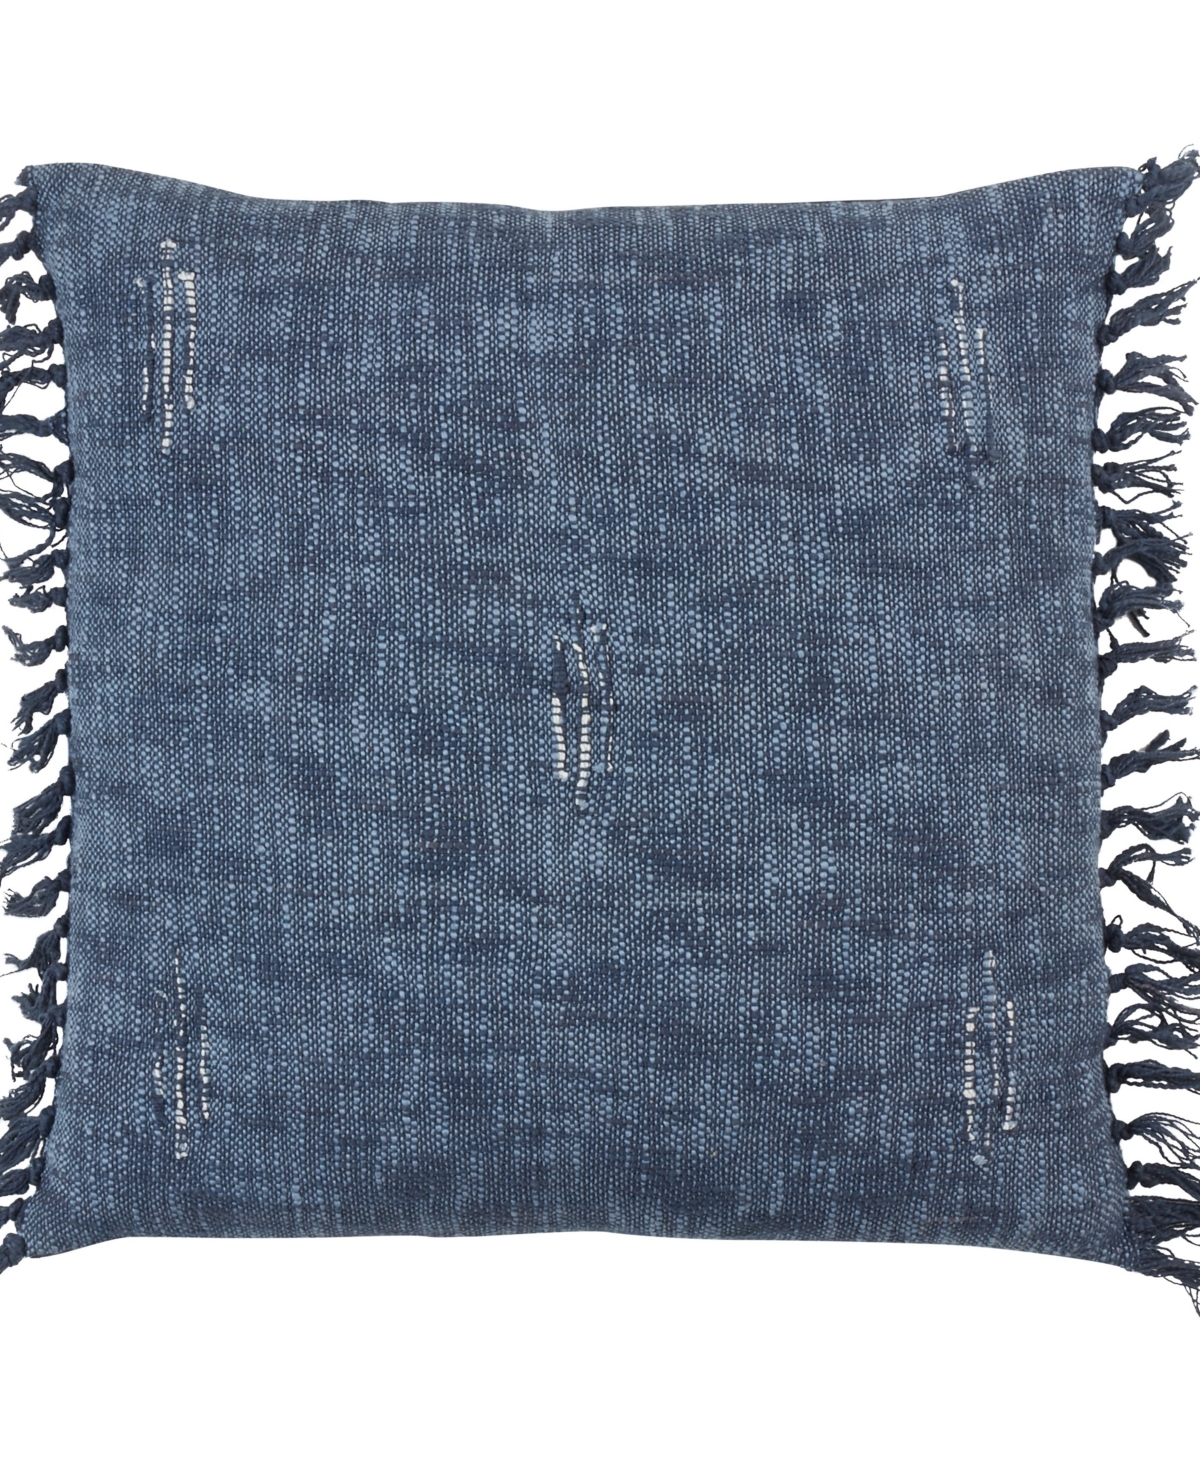 Saro Lifestyle Stitched Line Decorative Pillow, 20" X 20" In Navy Blue